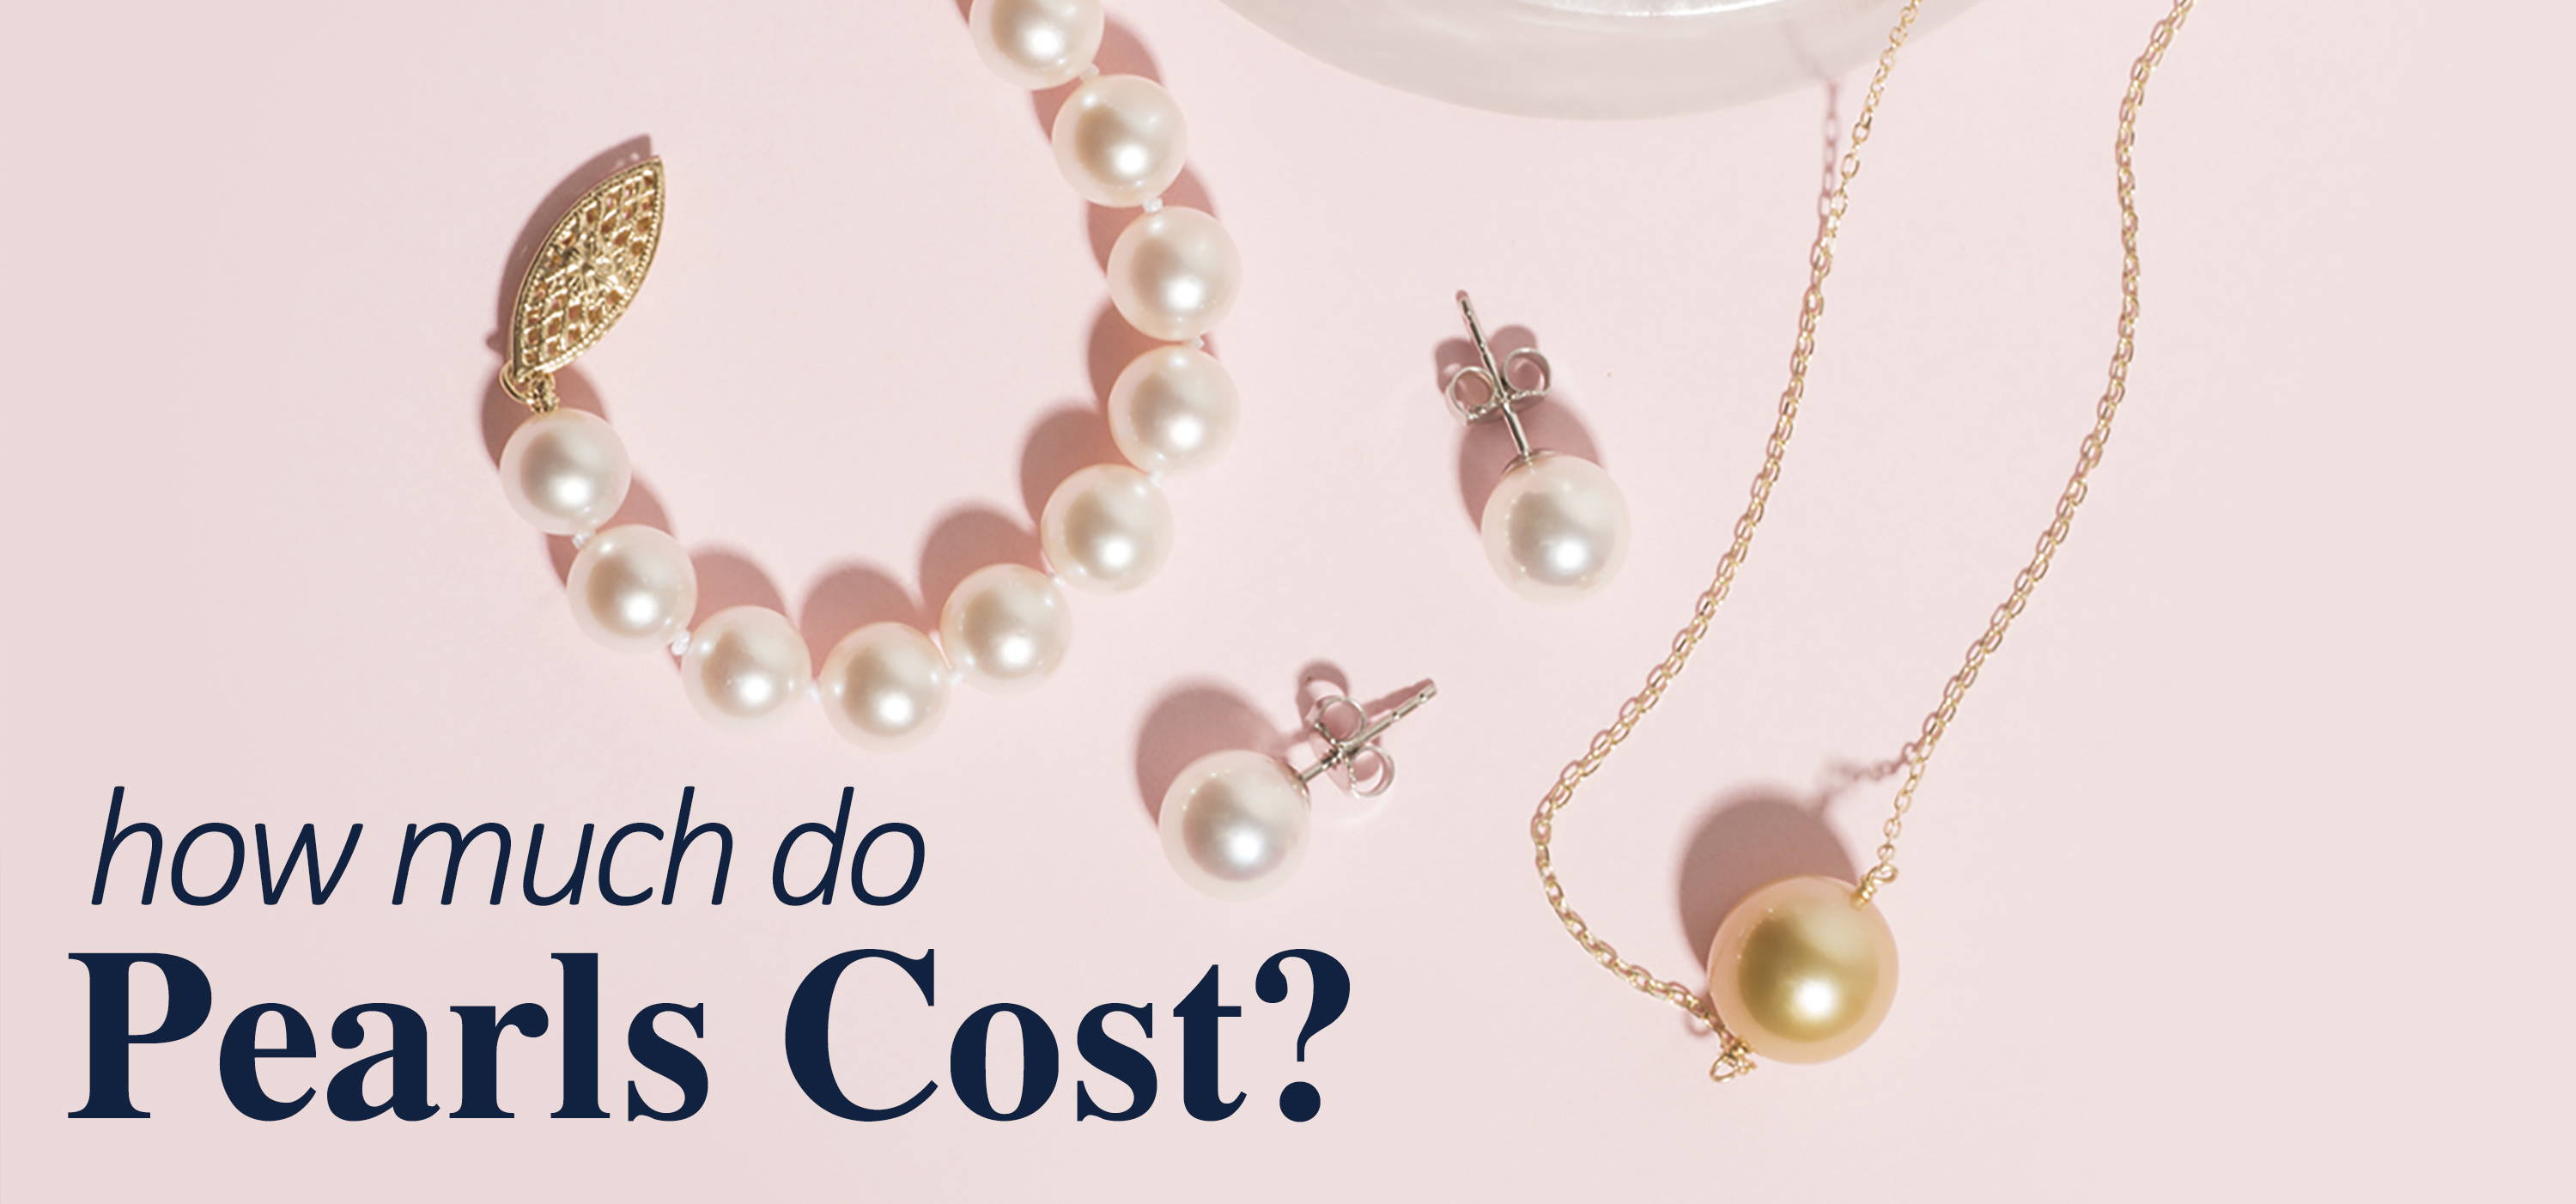 How much do pearls cost page banner